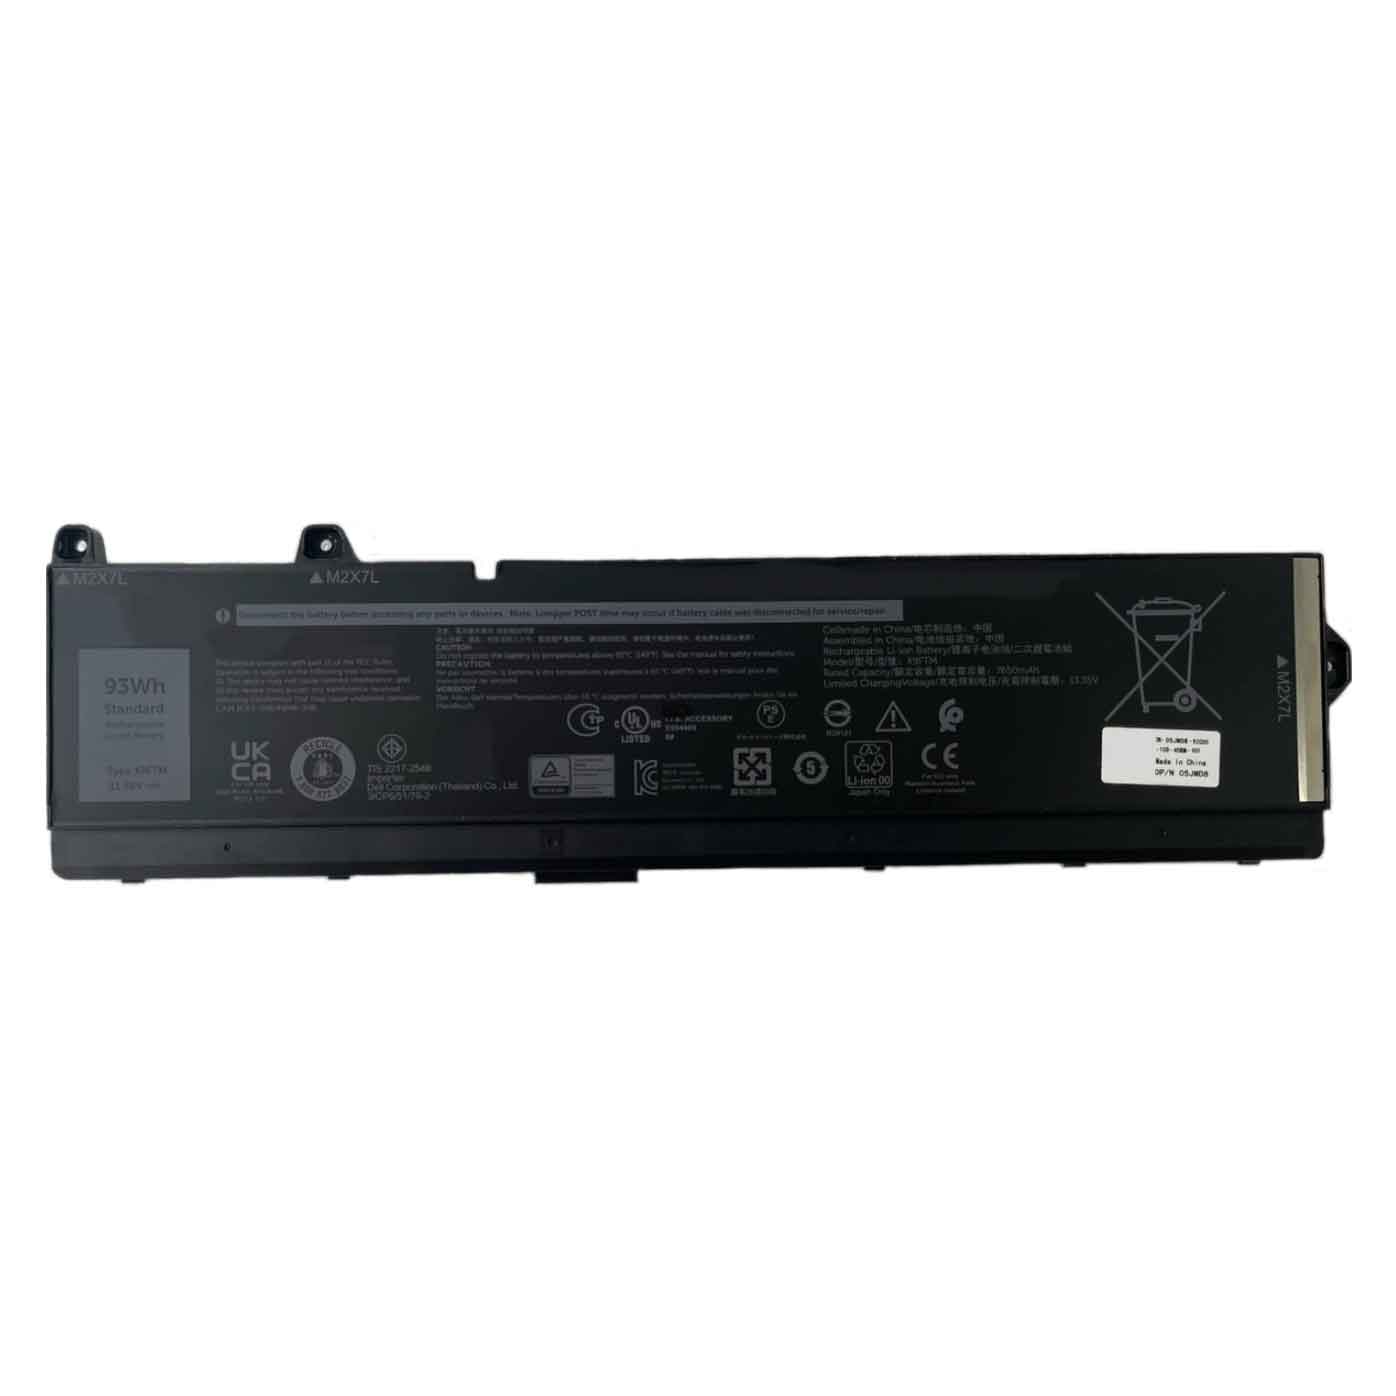 Dell X9FTM replacement battery